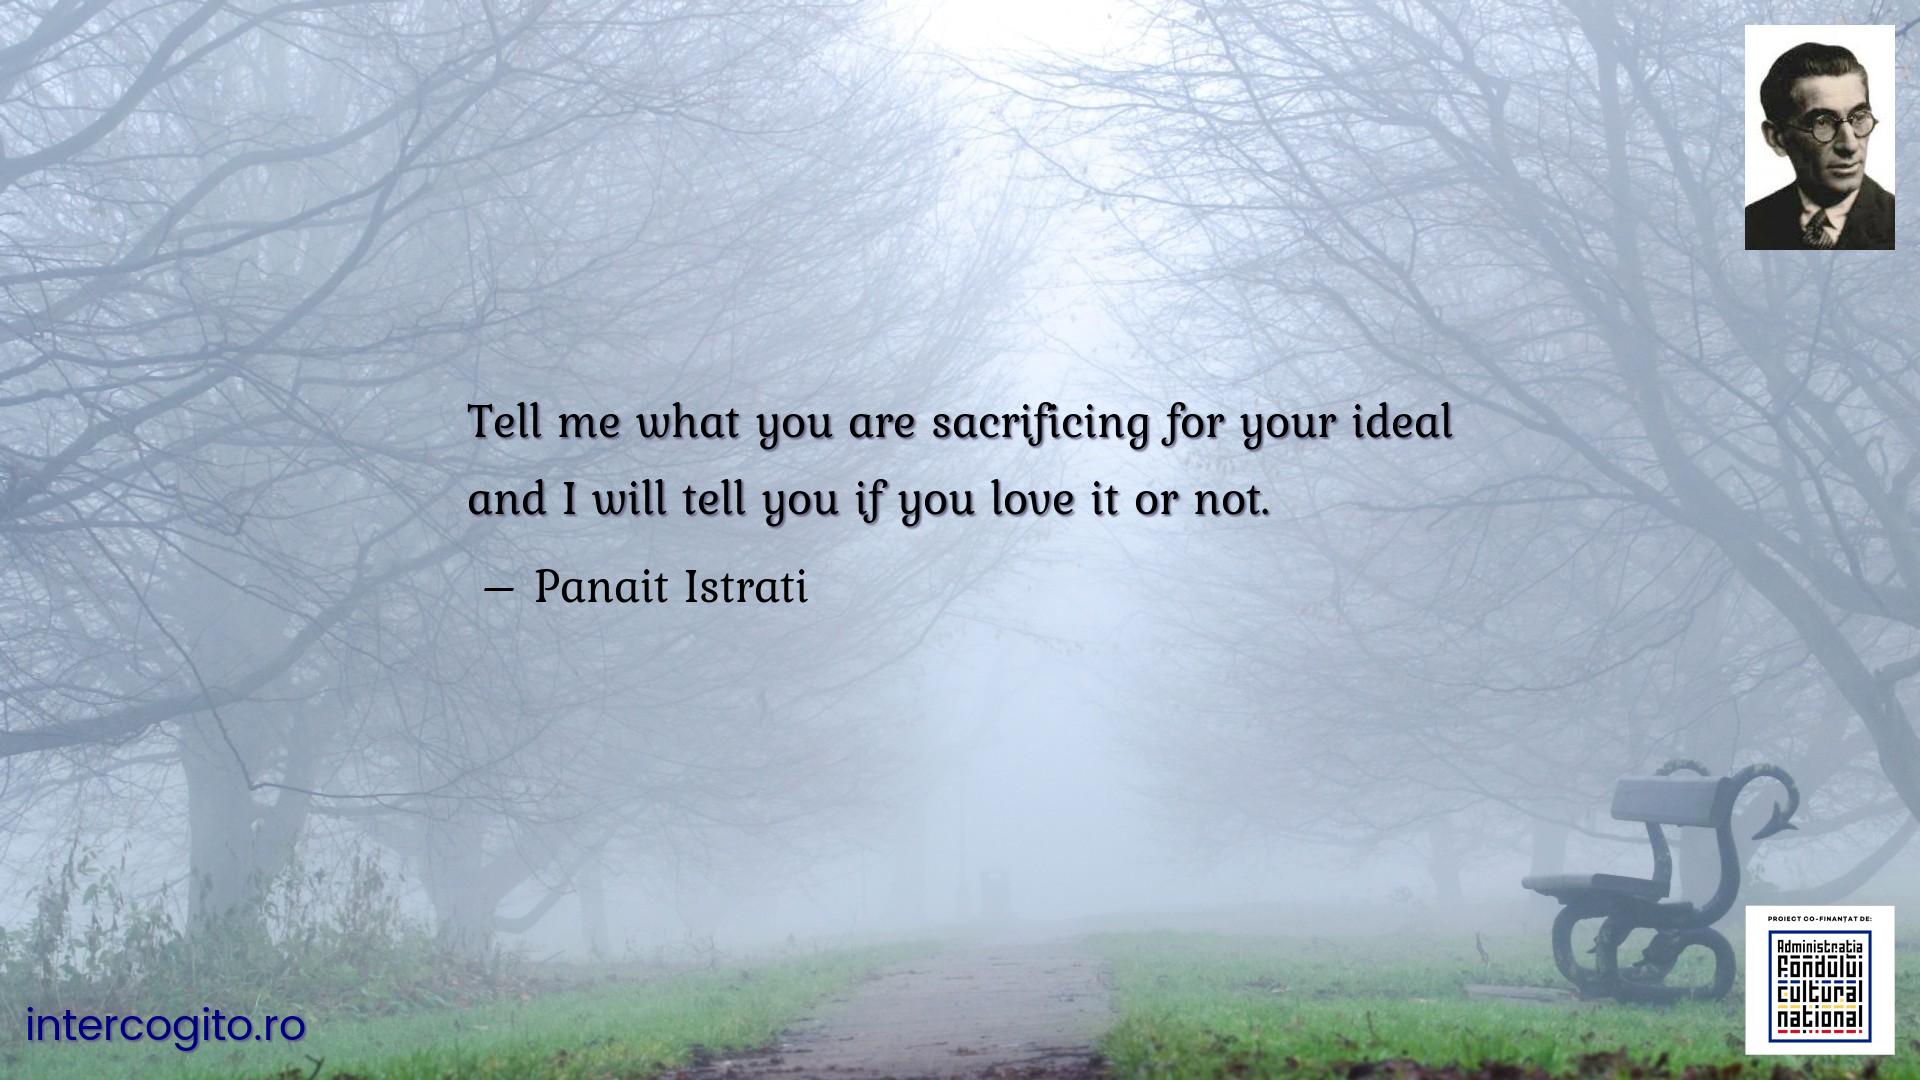 Tell me what you are sacrificing for your ideal and I will tell you if you love it or not.